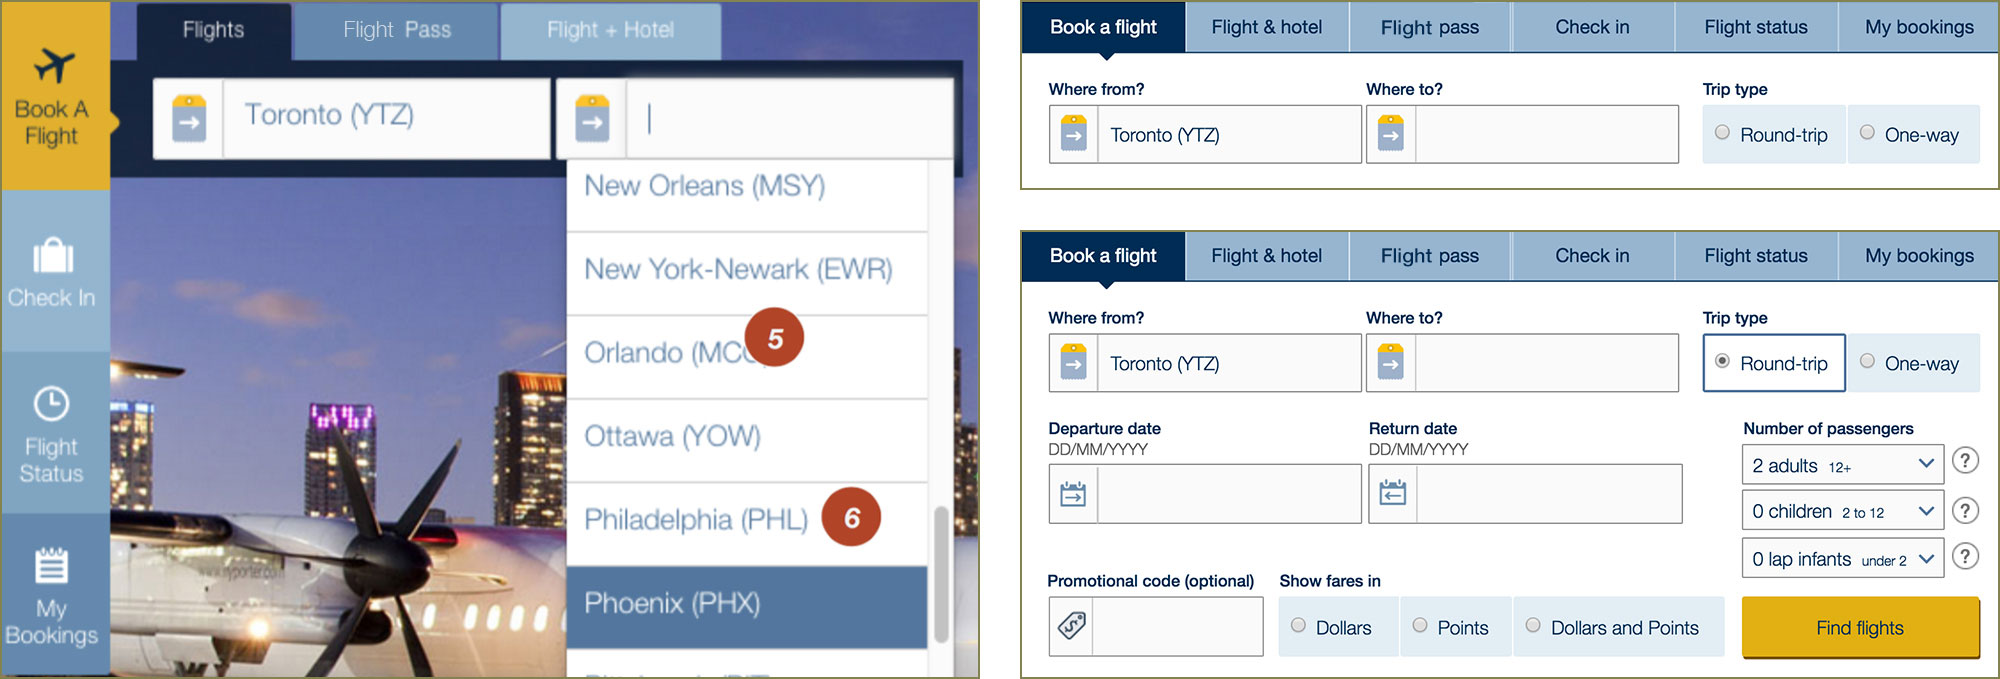 Screenshots of the airline's original booking widget and the accessibility revisions.